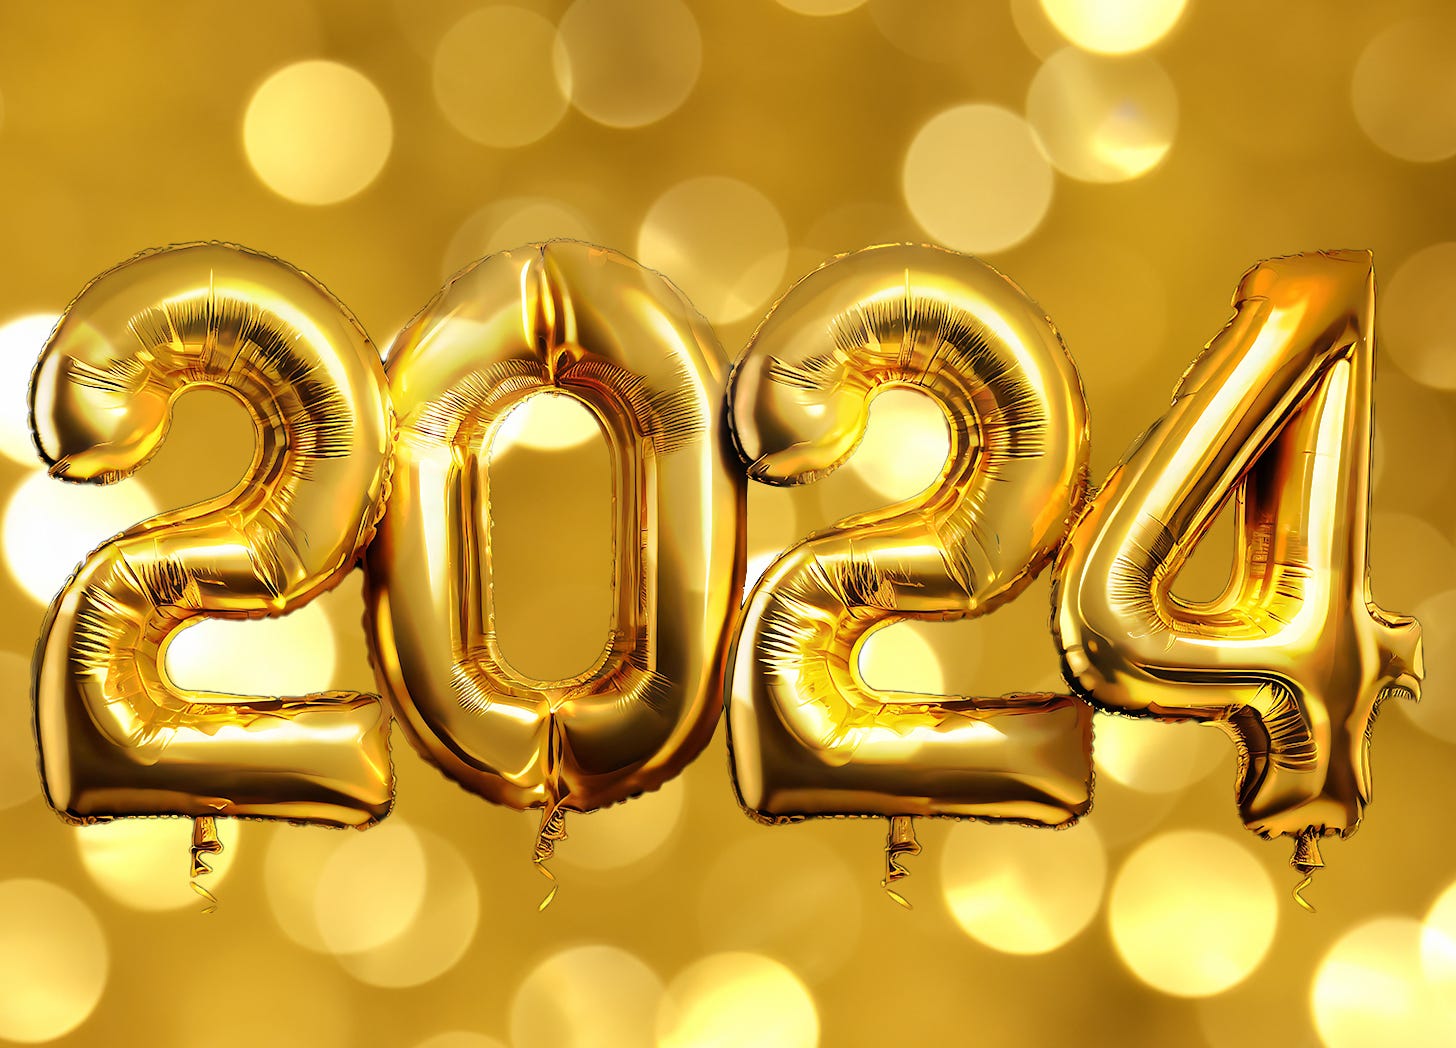 Gold balloons spelling out "2024" over a gold background with light gold dots